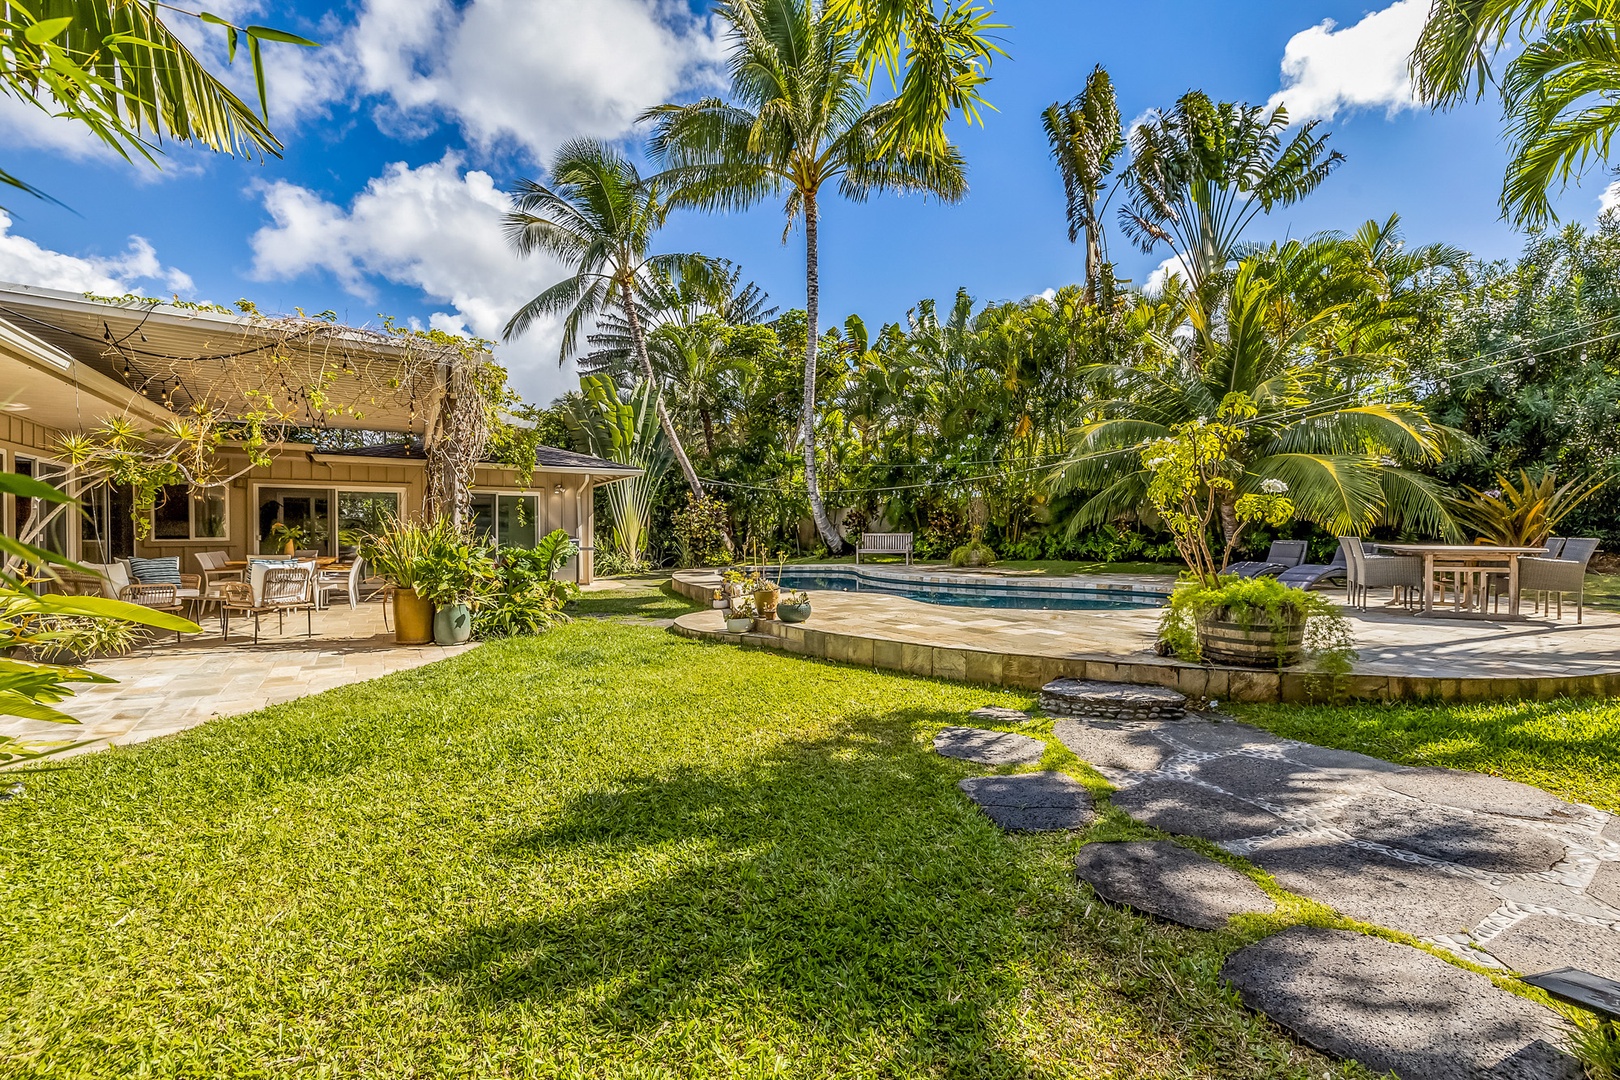 Honolulu Vacation Rentals, Hale Ho'omaha - Enjoy the beautifully manicured lawn and tall palm trees